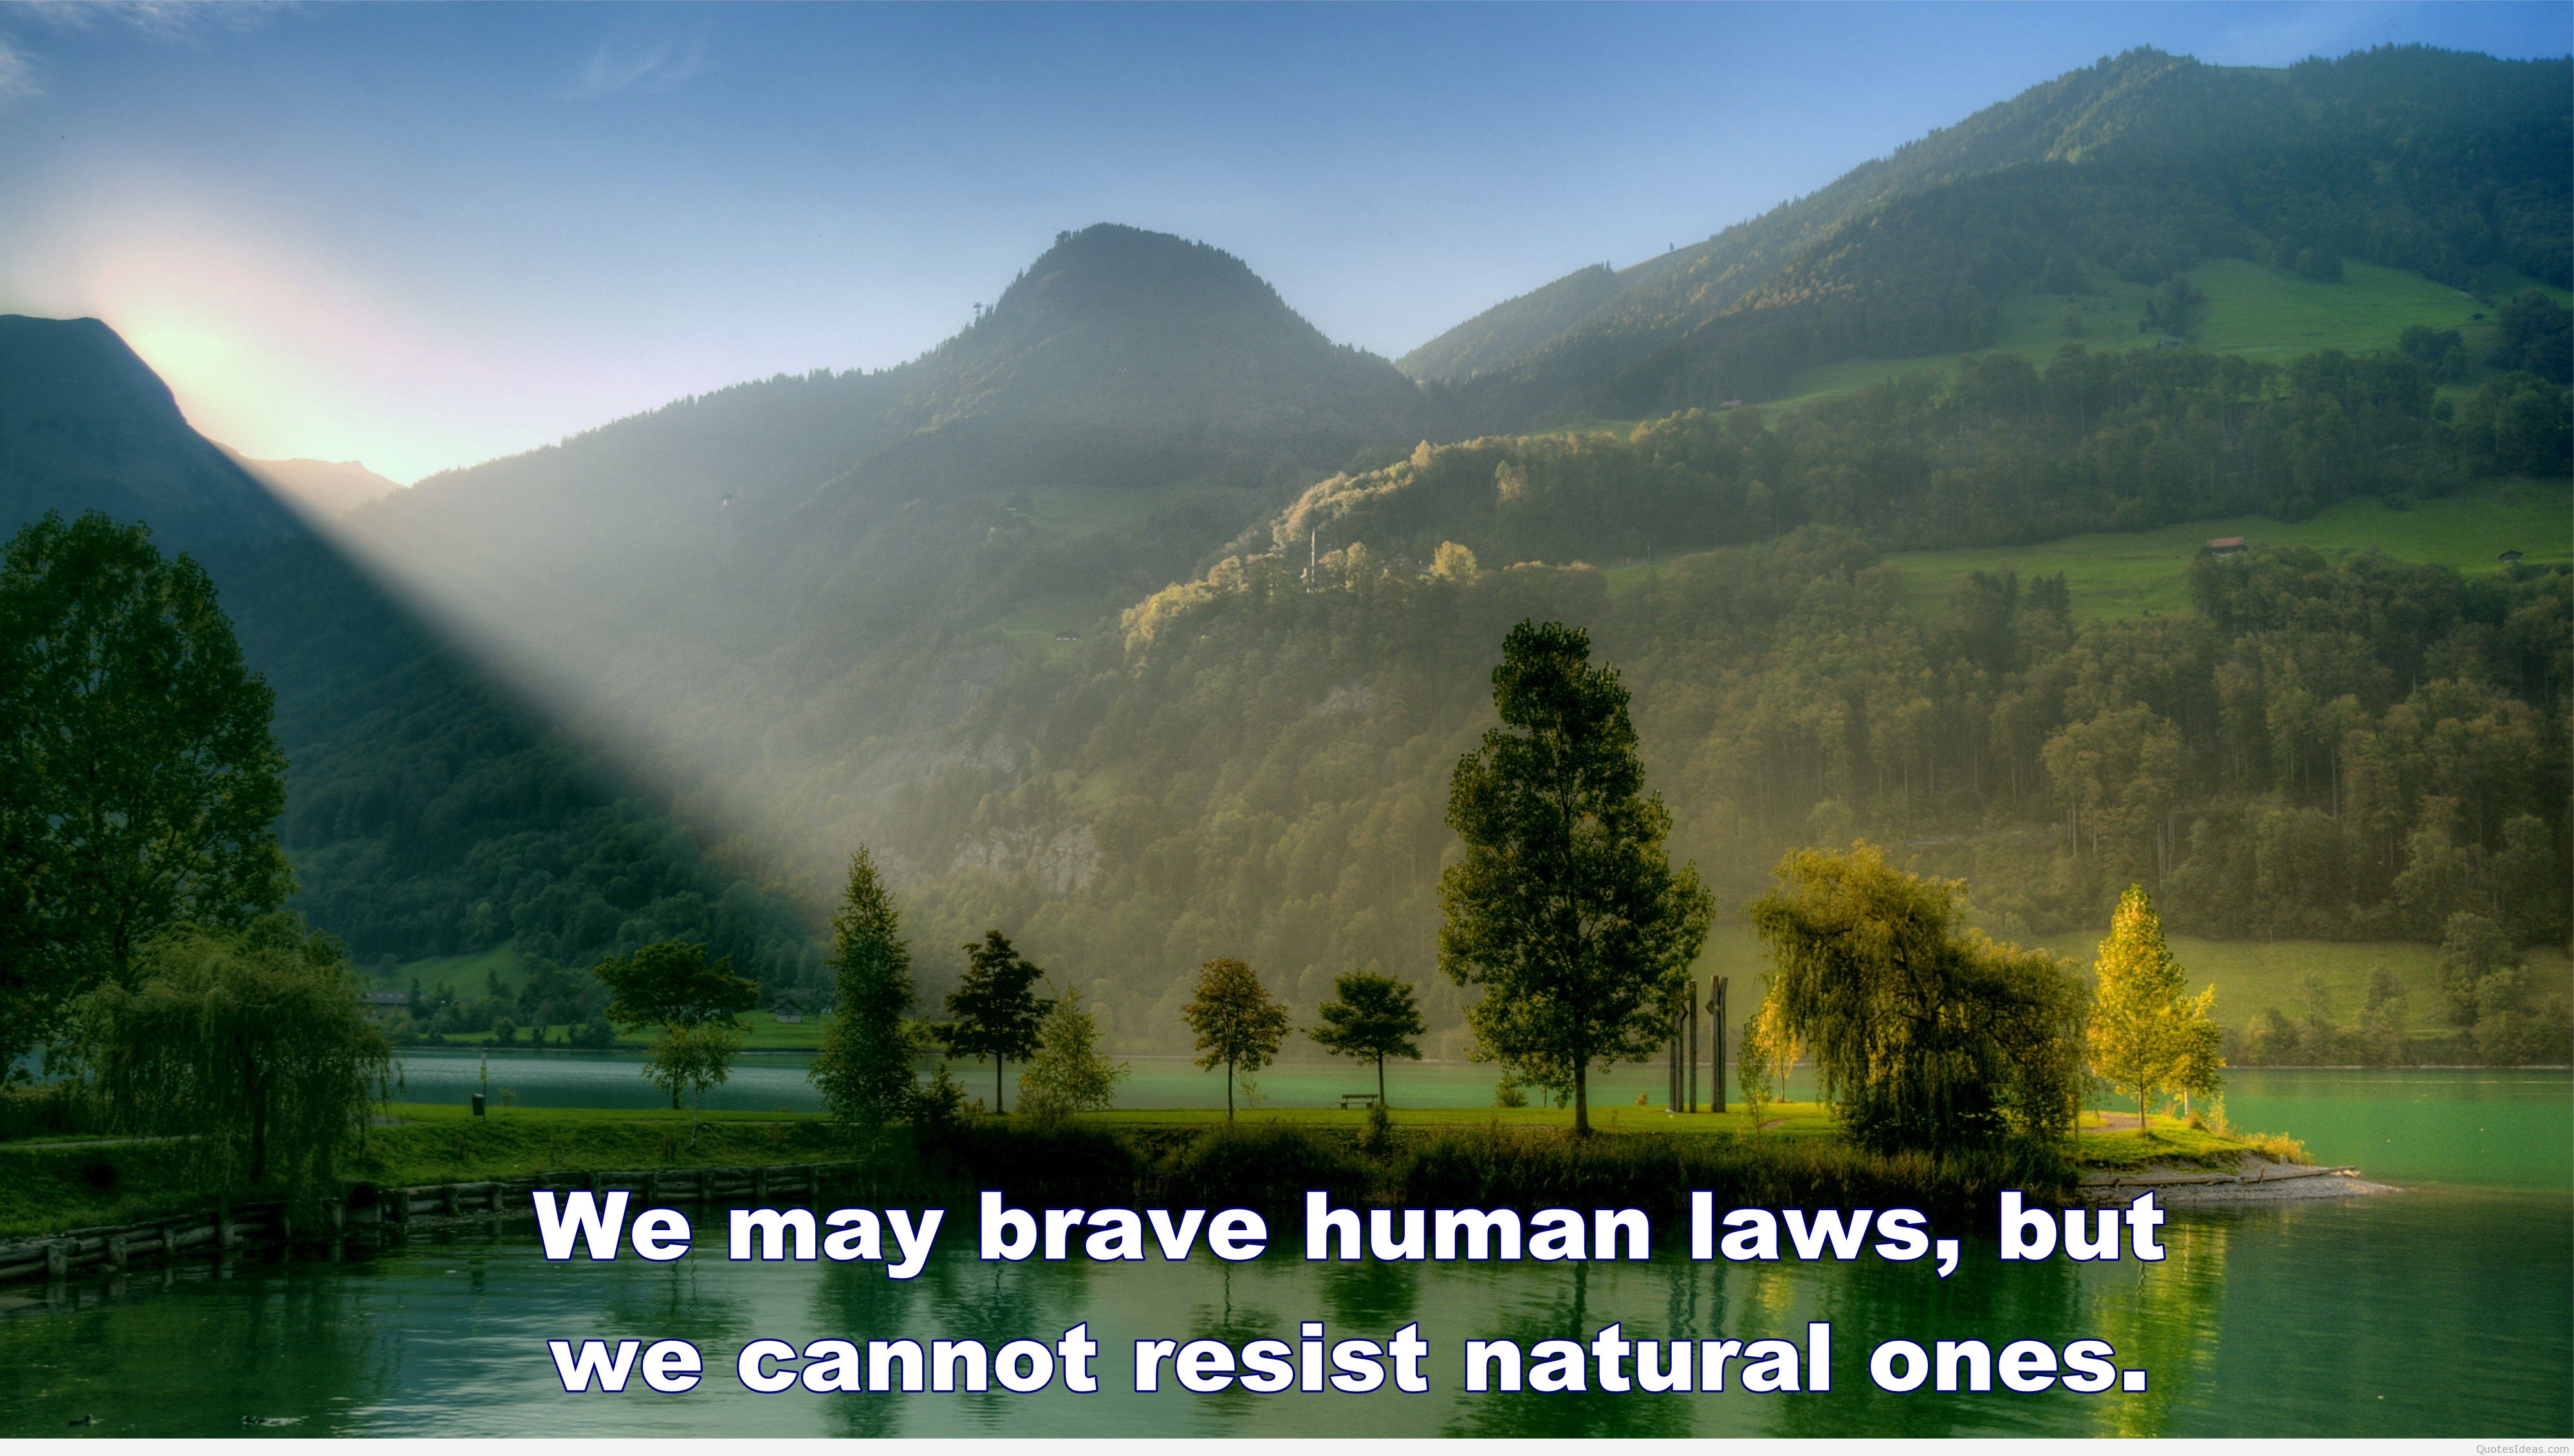 nature wallpaper with quotes,highland,natural landscape,nature,mountainous landforms,hill station